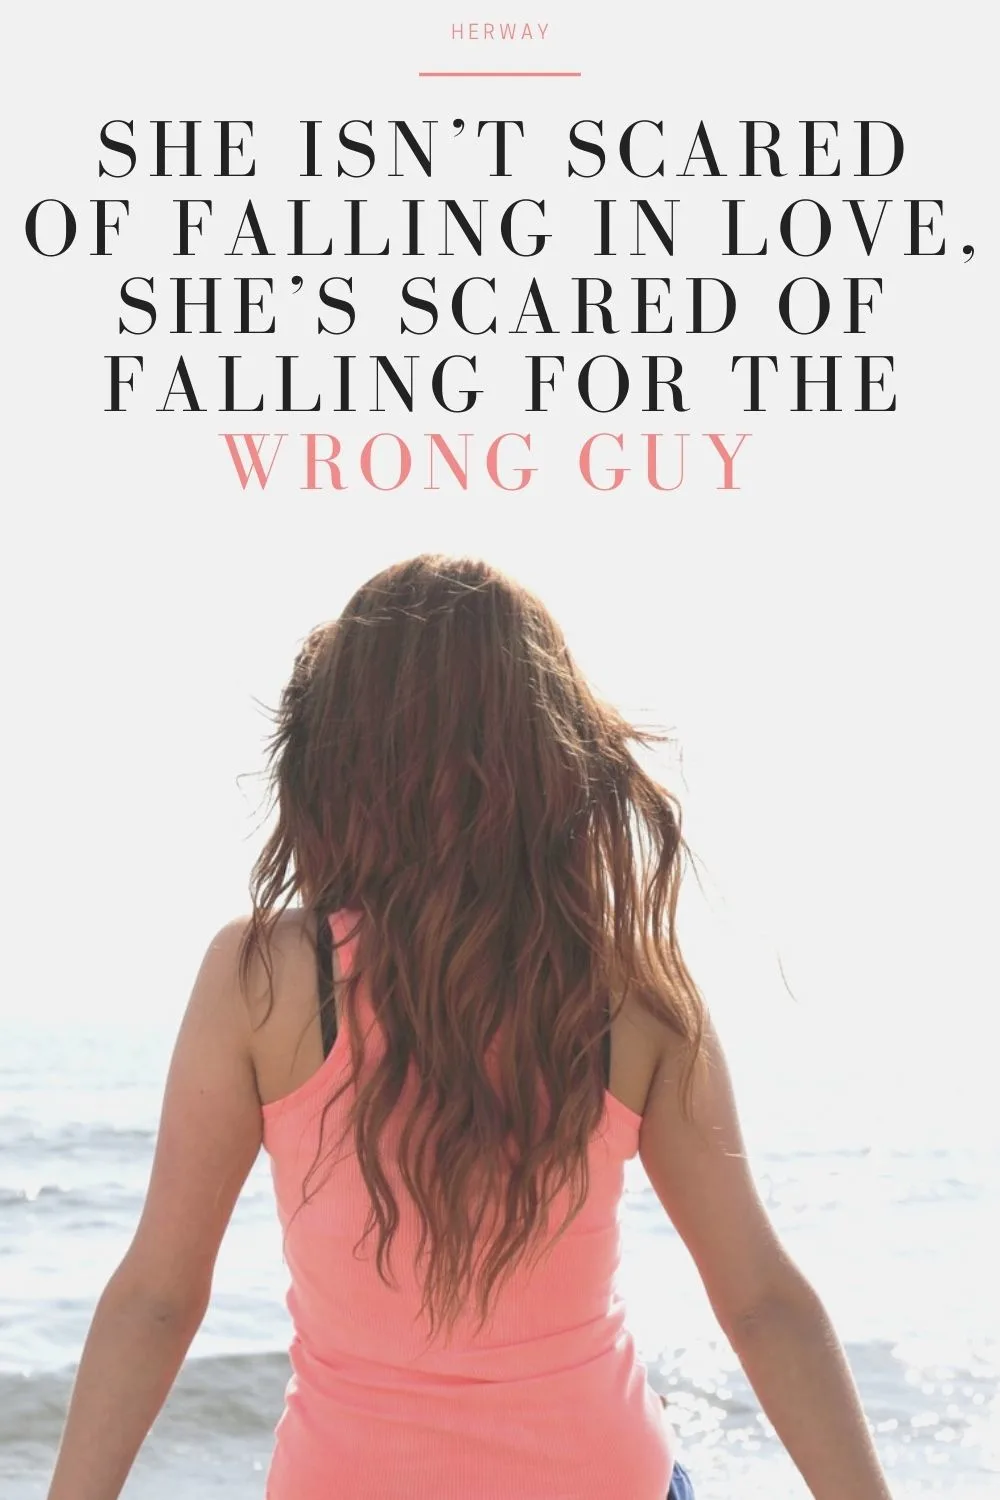 She Isn’t Scared Of Falling In Love, She’s Scared Of Falling For The Wrong Guy